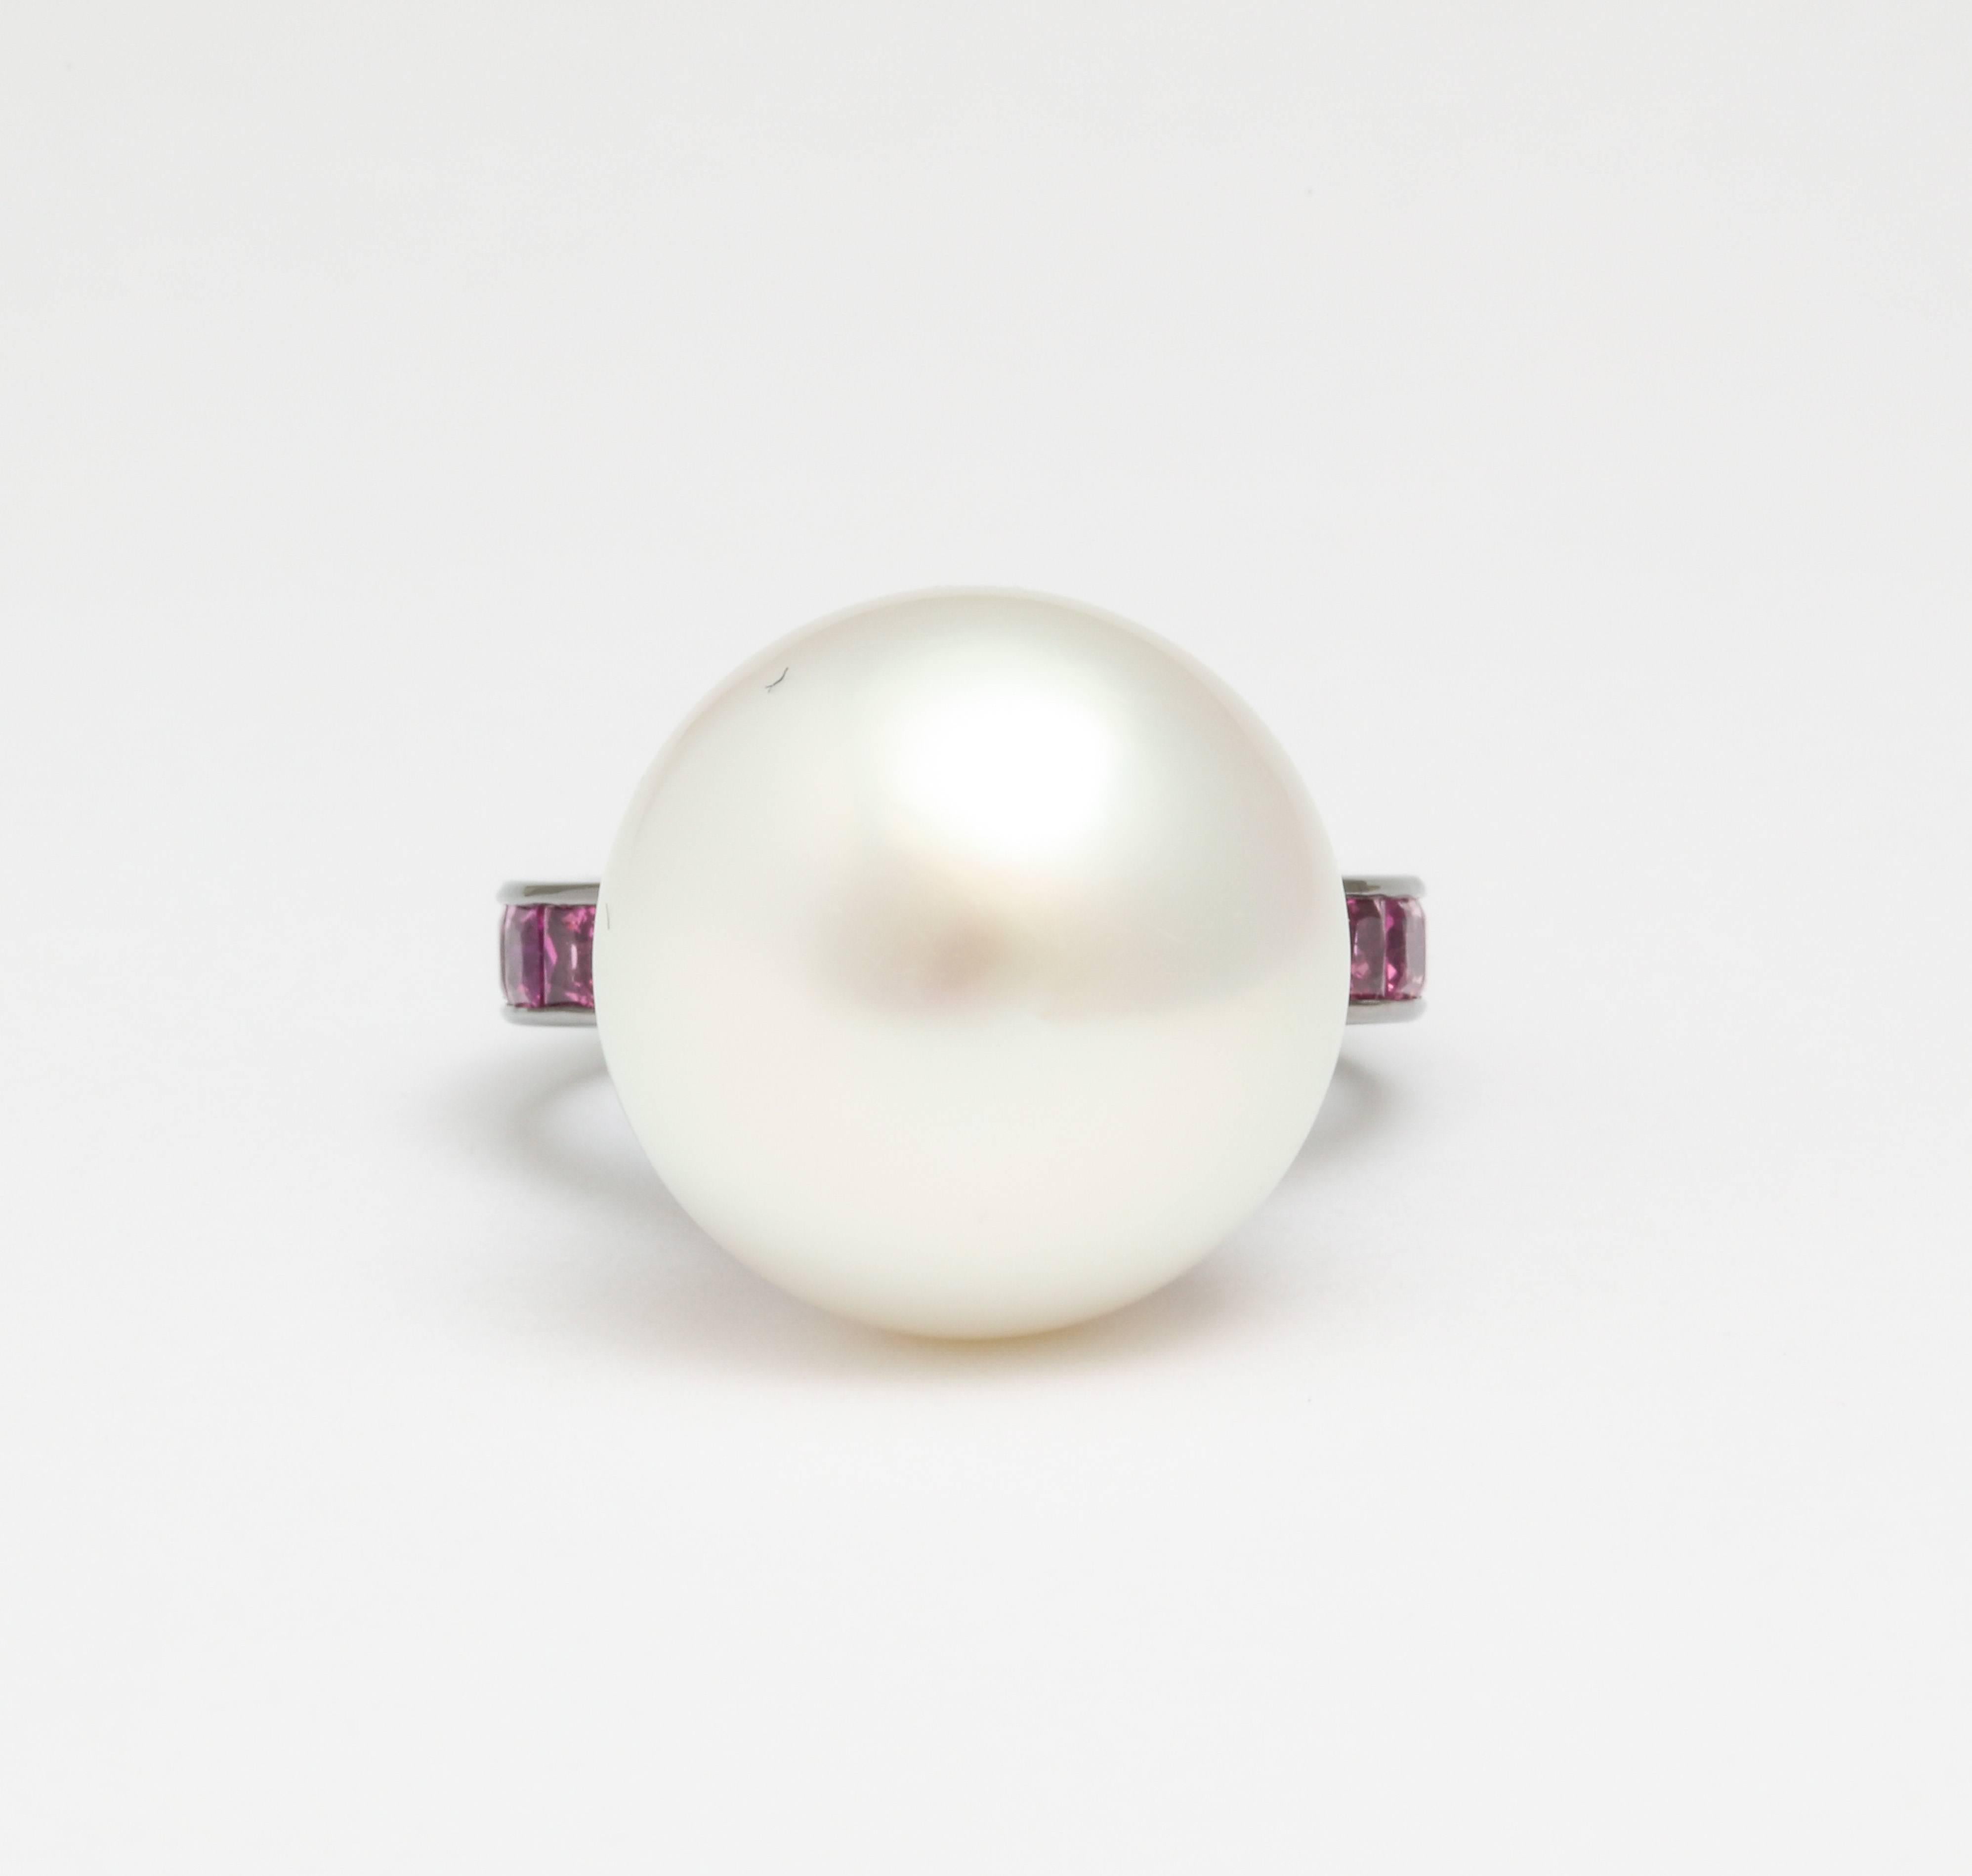 A ring set in 18 karat white gold with black rhodium featuring an exceptional 30.99 carat South Sea pearl. The pearl measures 16.8 x 15.2mm and weighs 1.64 momme. There are 14 princess cut hot pink sapphires on the band, weighing a total of 2.73